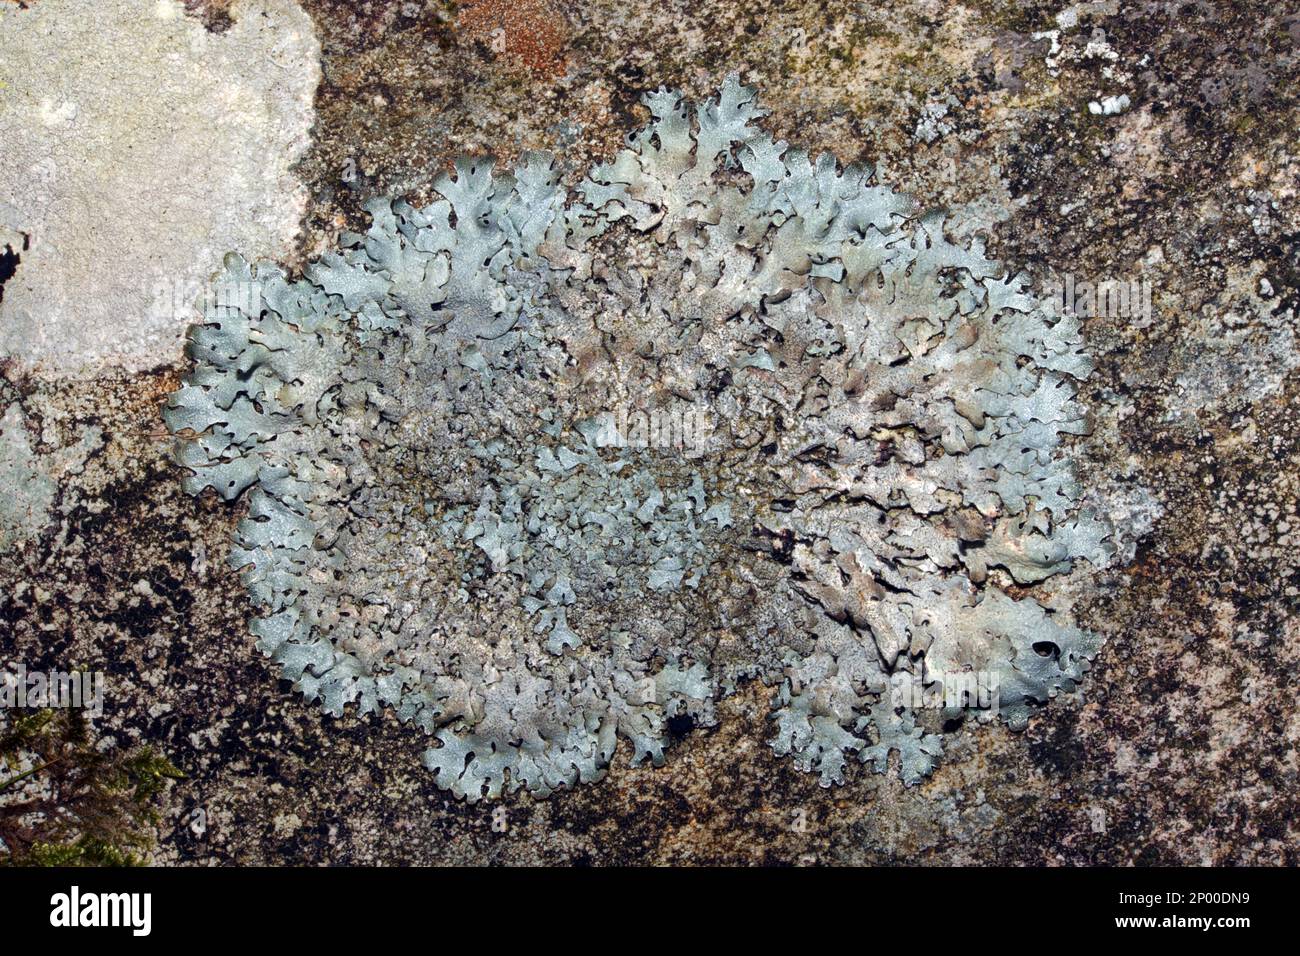 Parmelia saxatilis is common on rocks and acid barked trees. It is widely distributed in temperate and boreal zones of the northern Hemisphere. Stock Photo